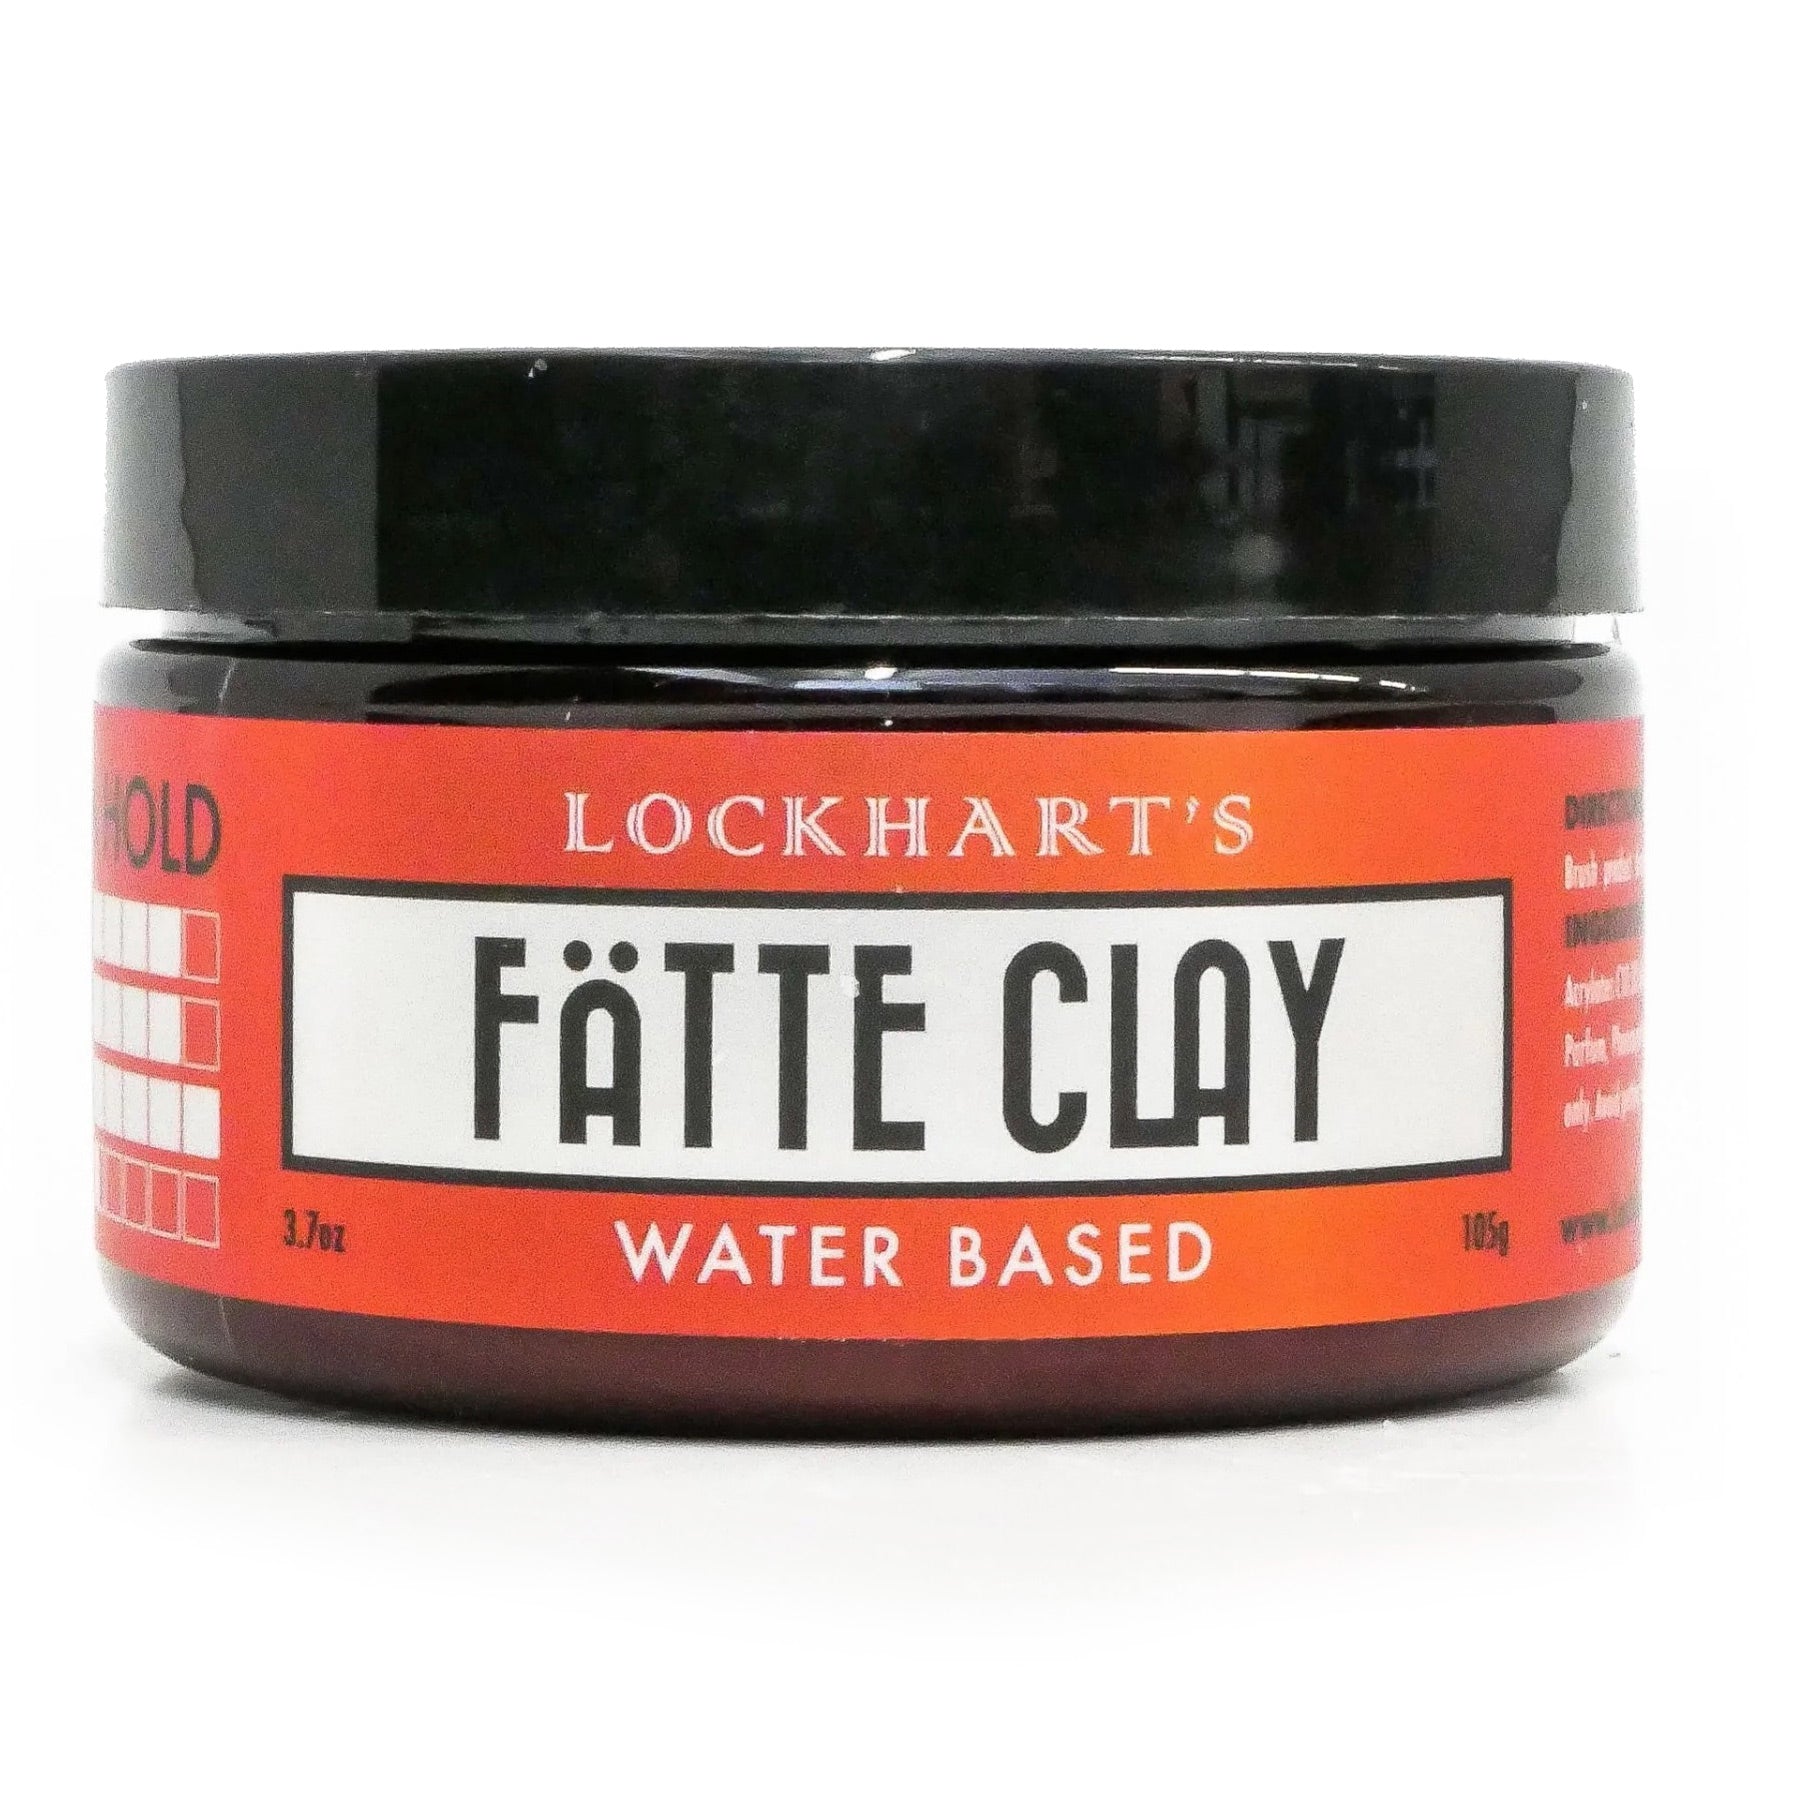 Lockharts fatte clay side